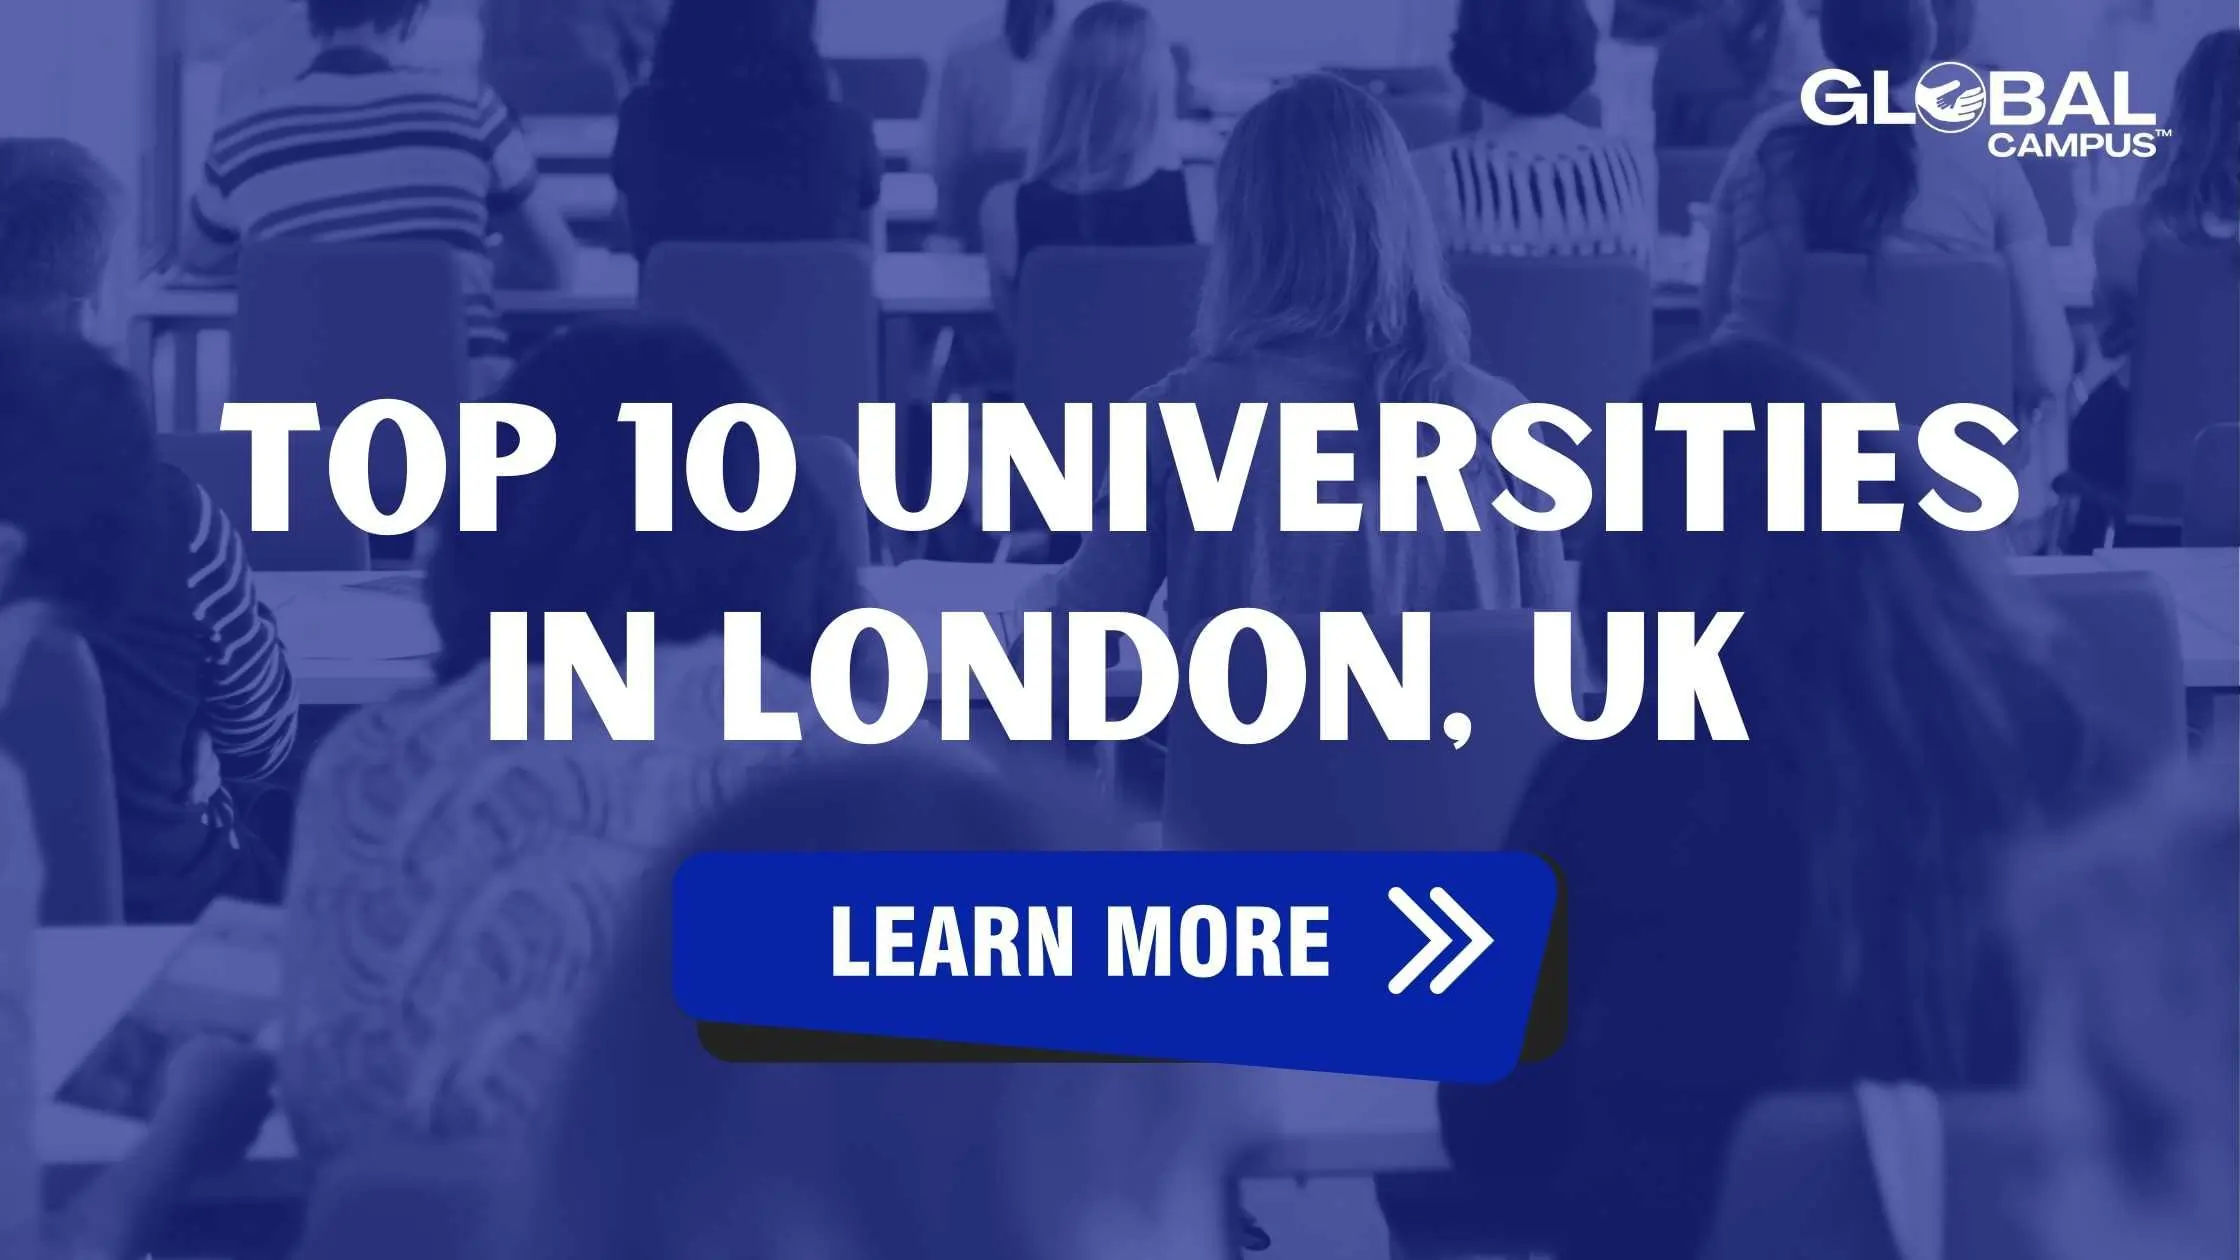 Top 10 Universities in London for International Students